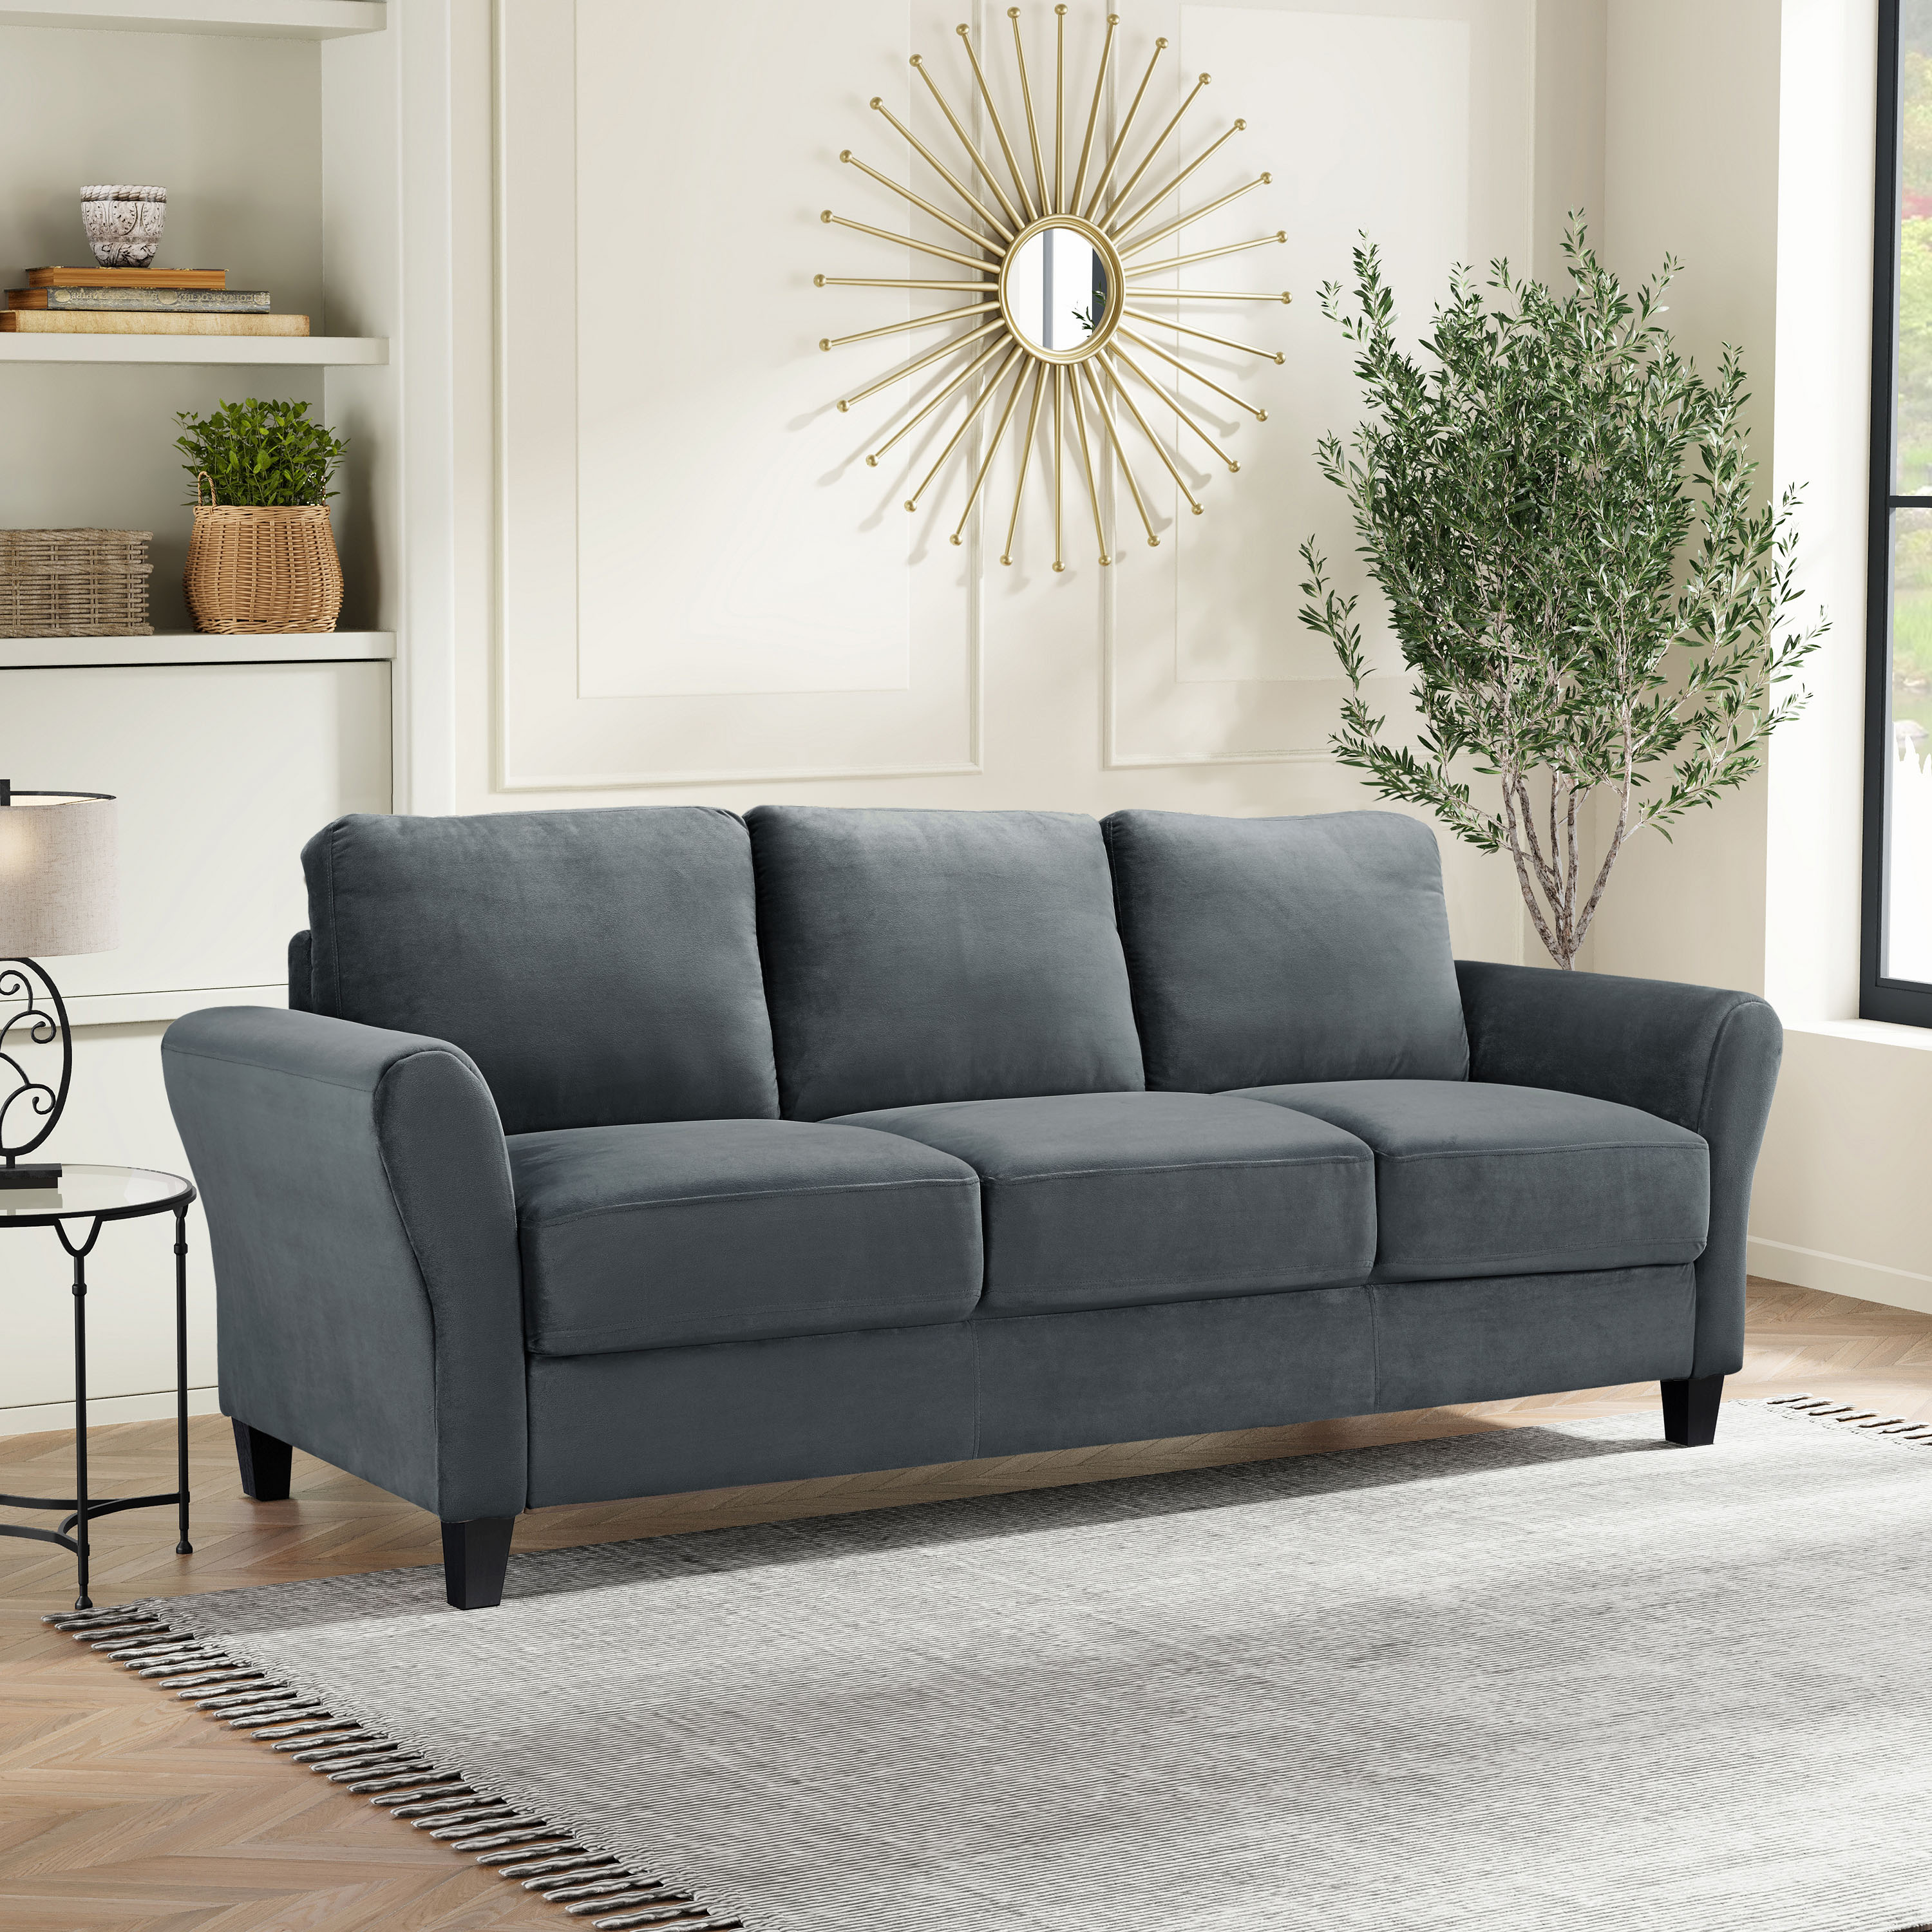 Lifestyle Solutions Alexa Sofa with Curved Arms, Gray Fabric - image 1 of 6